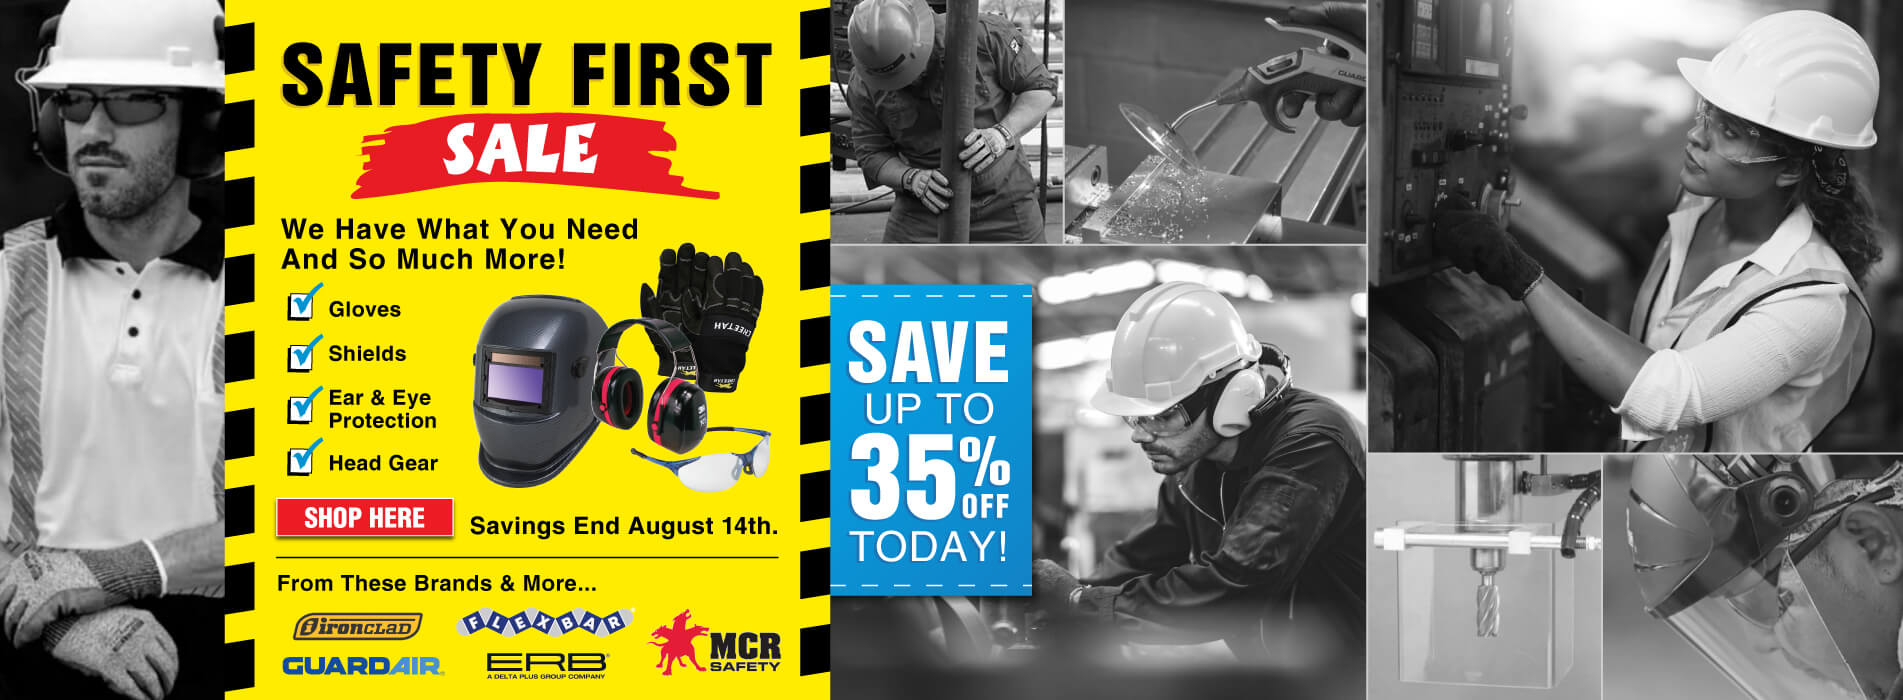 Safety First Sale! Up To 35% Off Safety & PPE! Get deals on Gloves, Shields, Eye & Ear Protection, and more! 